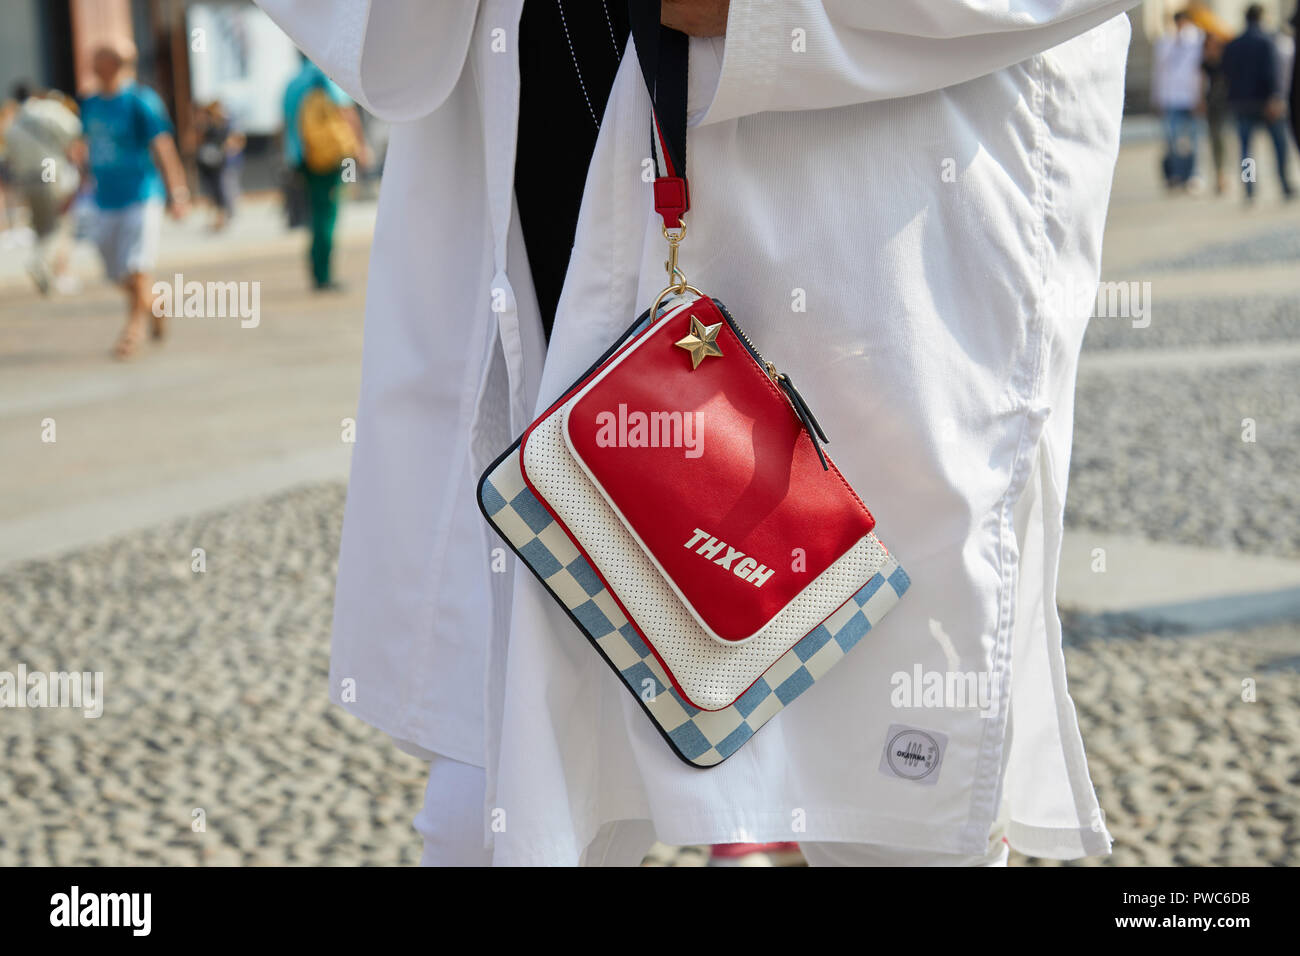 MILAN, ITALY - SEPTEMBER 20, 2018: Man with white, large jacket and red, blue and white bag with golden star before Genny fashion show, Milan Fashion  Stock Photo